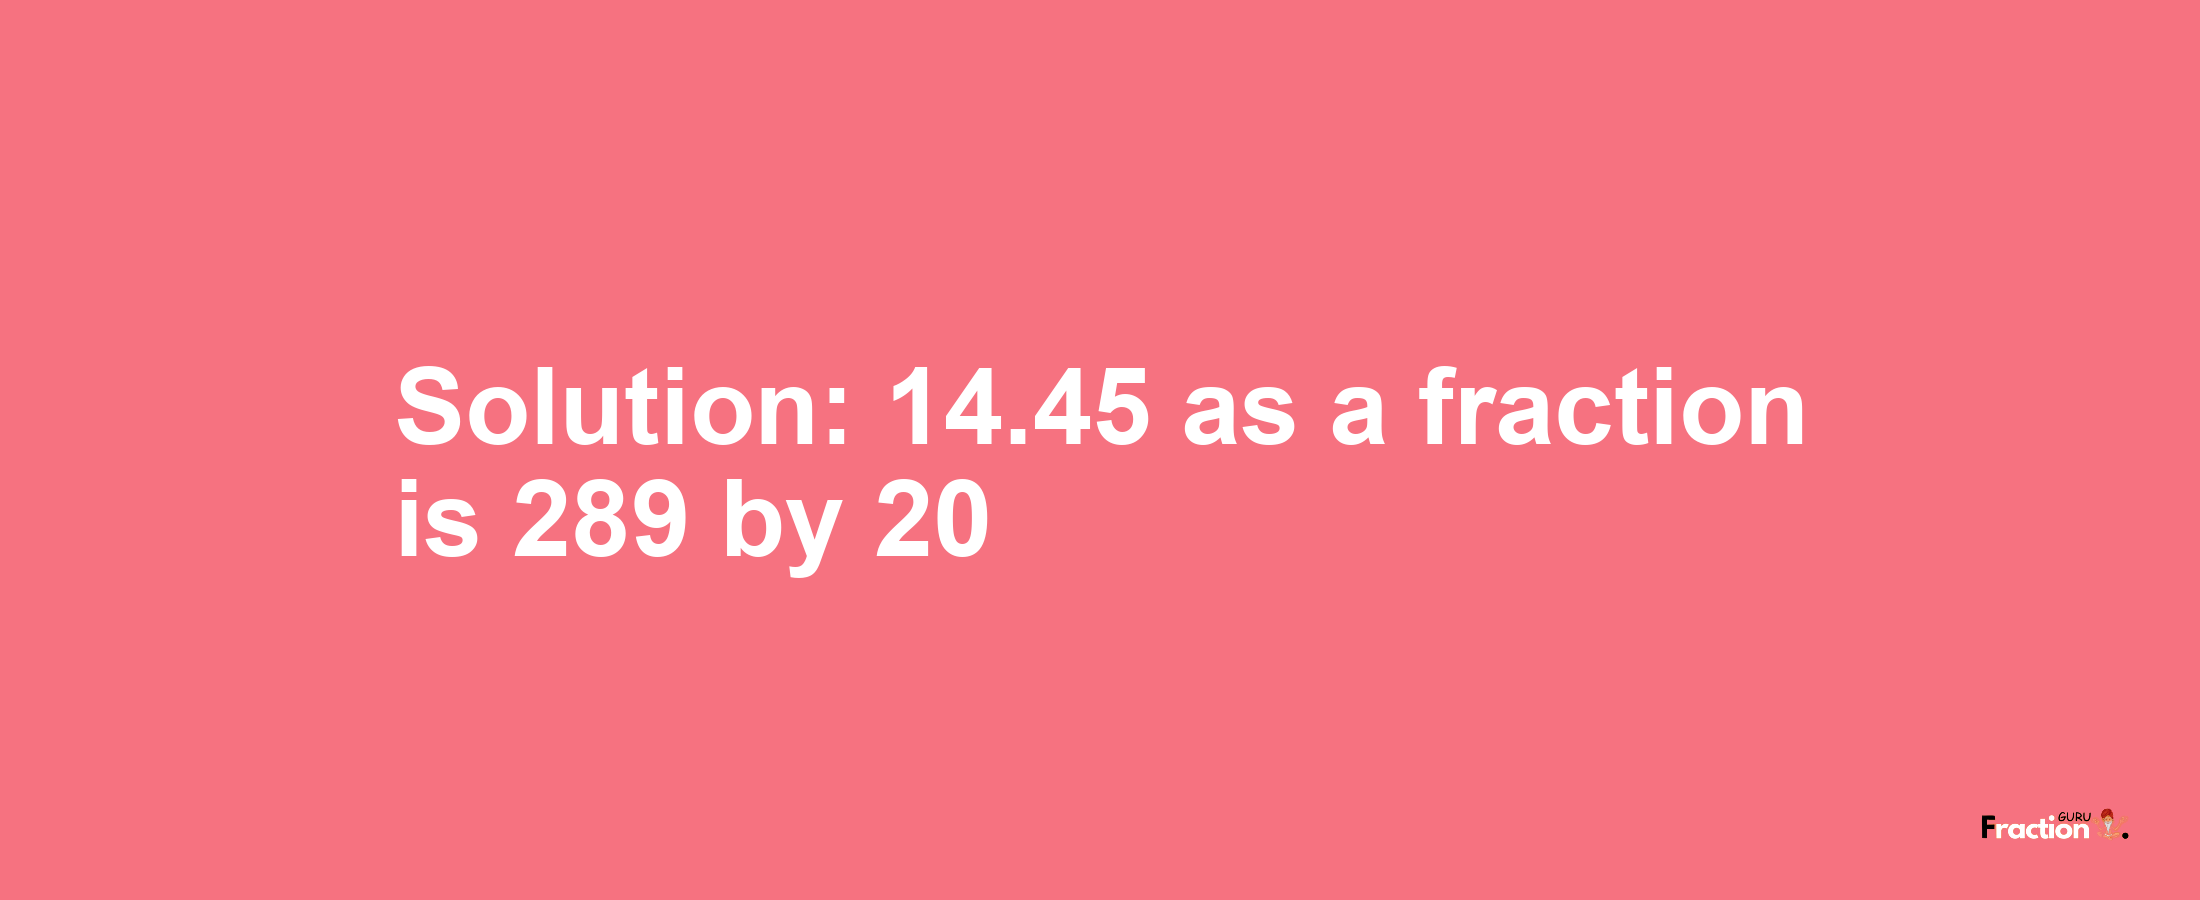 Solution:14.45 as a fraction is 289/20